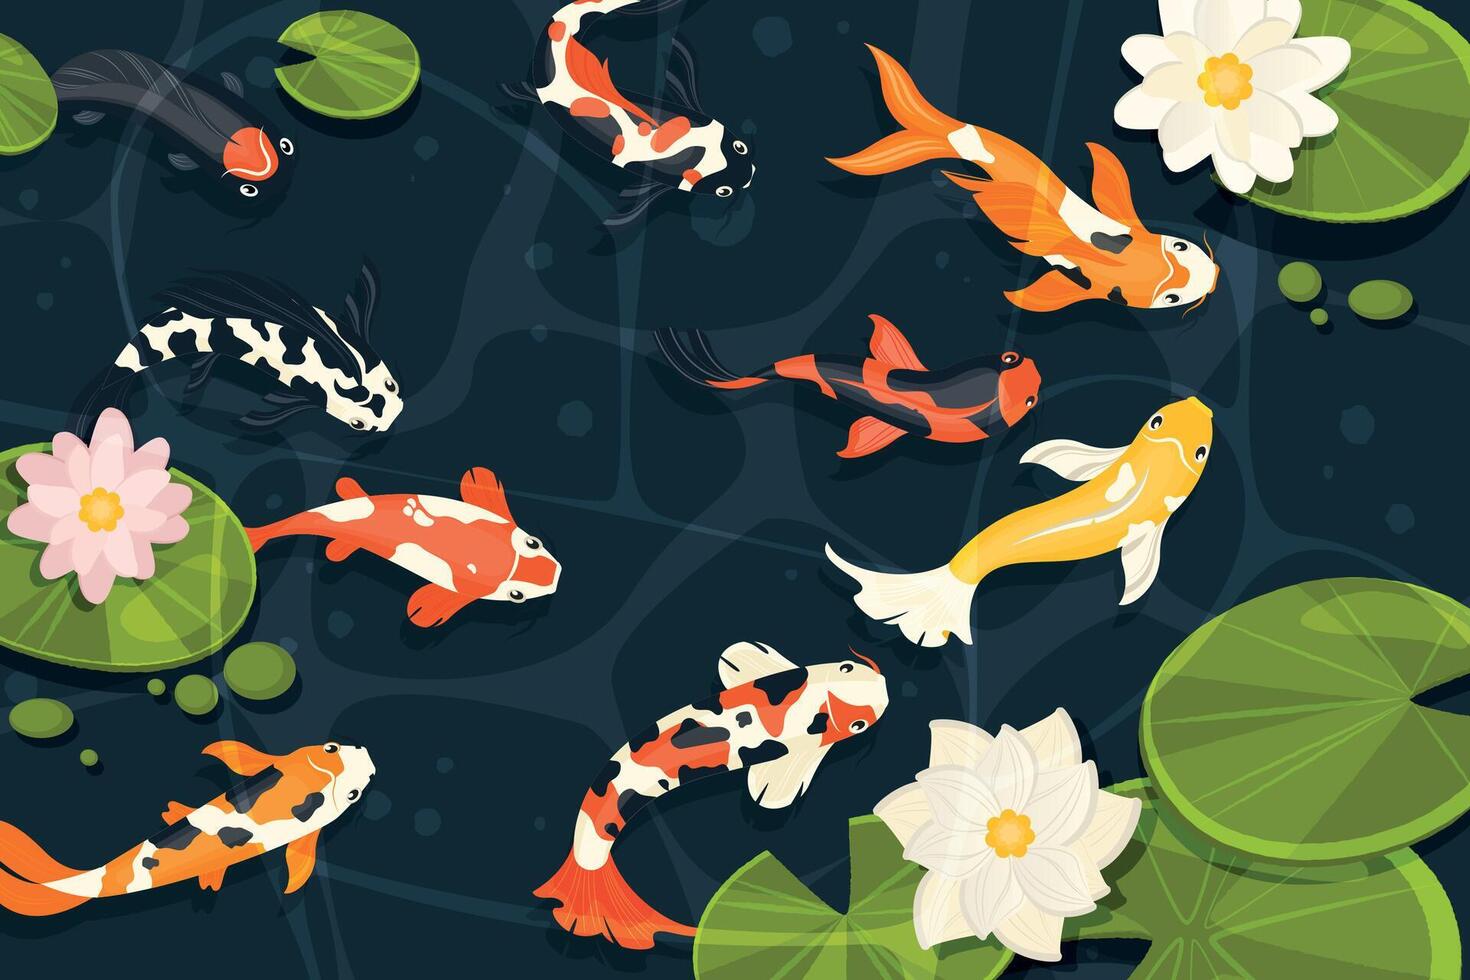 Pond with koi fish. Exotic decorative goldfish, cartoon chinese carp swimming in lake with lotus flowers in cartoon style. Vector illustration